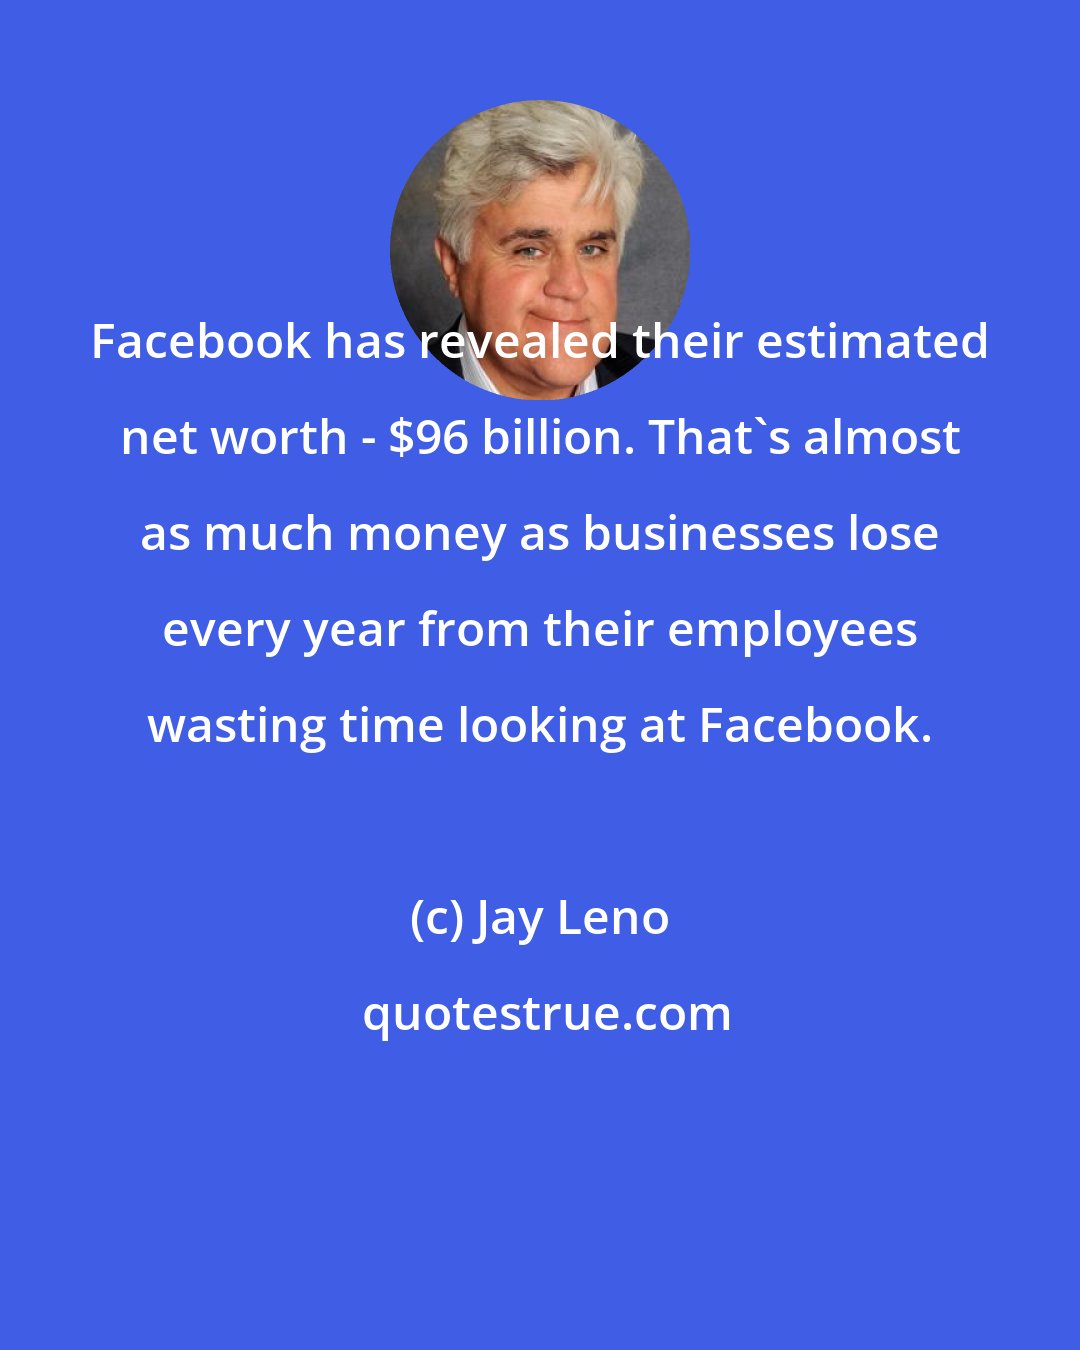 Jay Leno: Facebook has revealed their estimated net worth - $96 billion. That's almost as much money as businesses lose every year from their employees wasting time looking at Facebook.